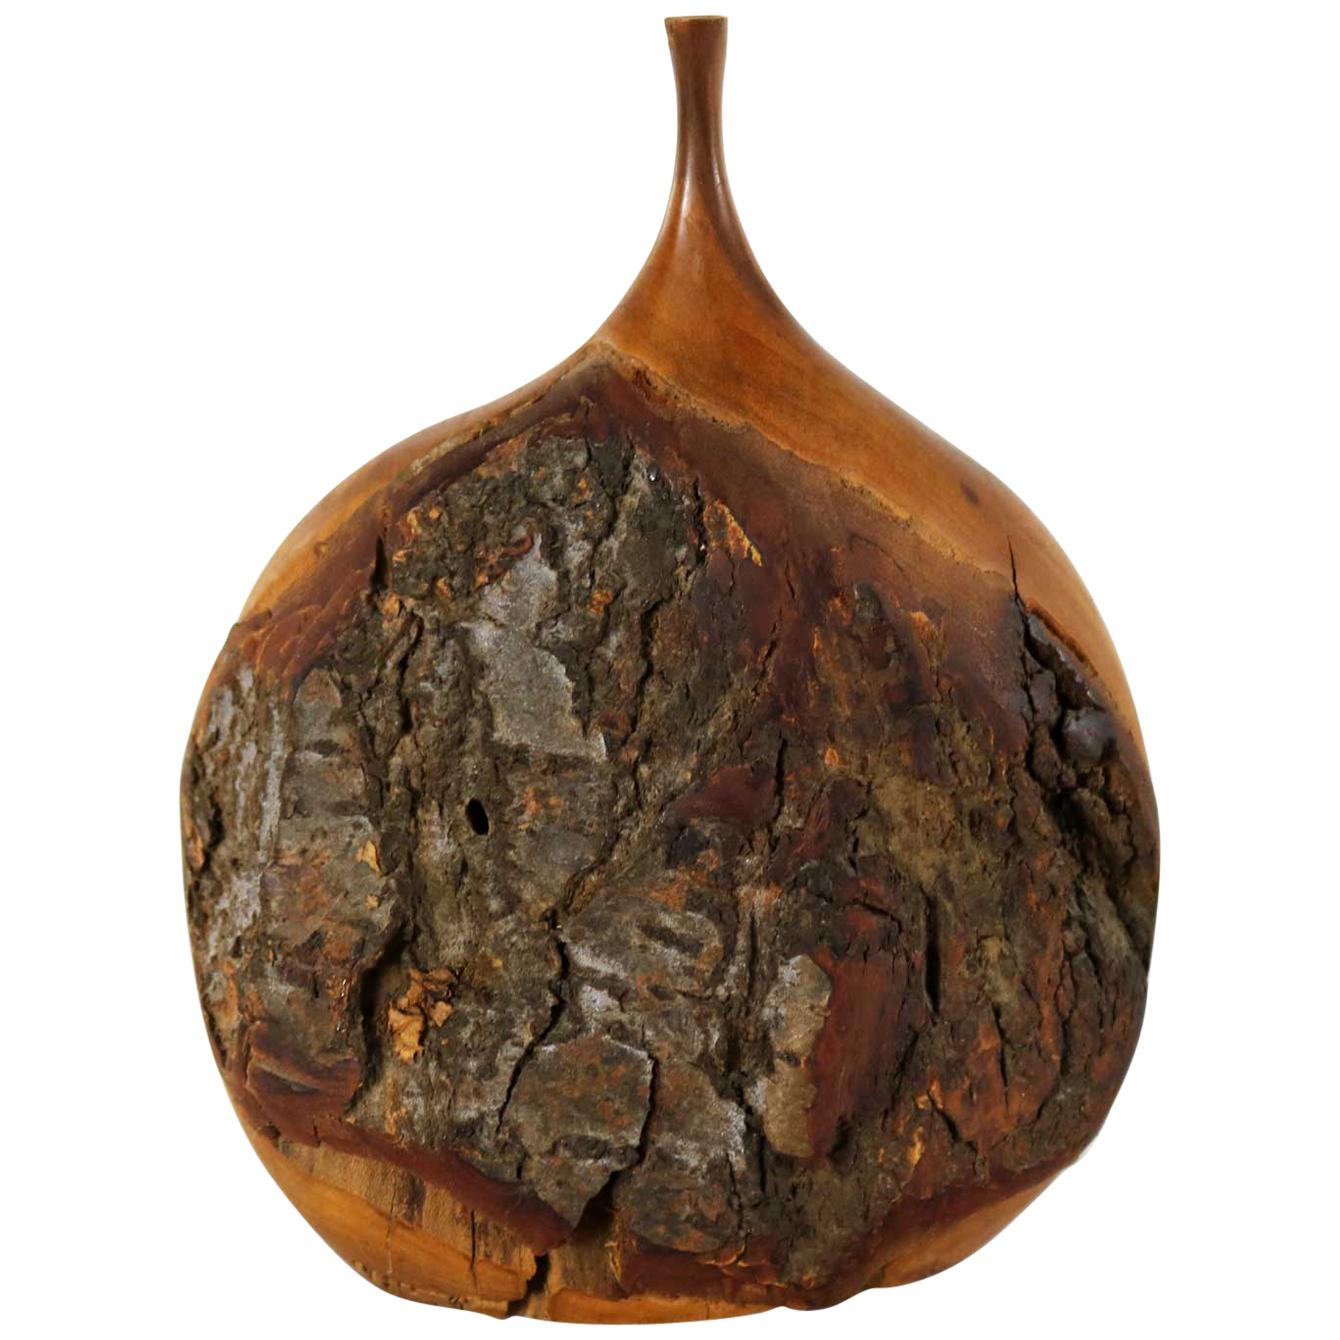 Fine Art Turned Apricot Wood Delicate Weed Vase with Natural Bark by Doug Ayers